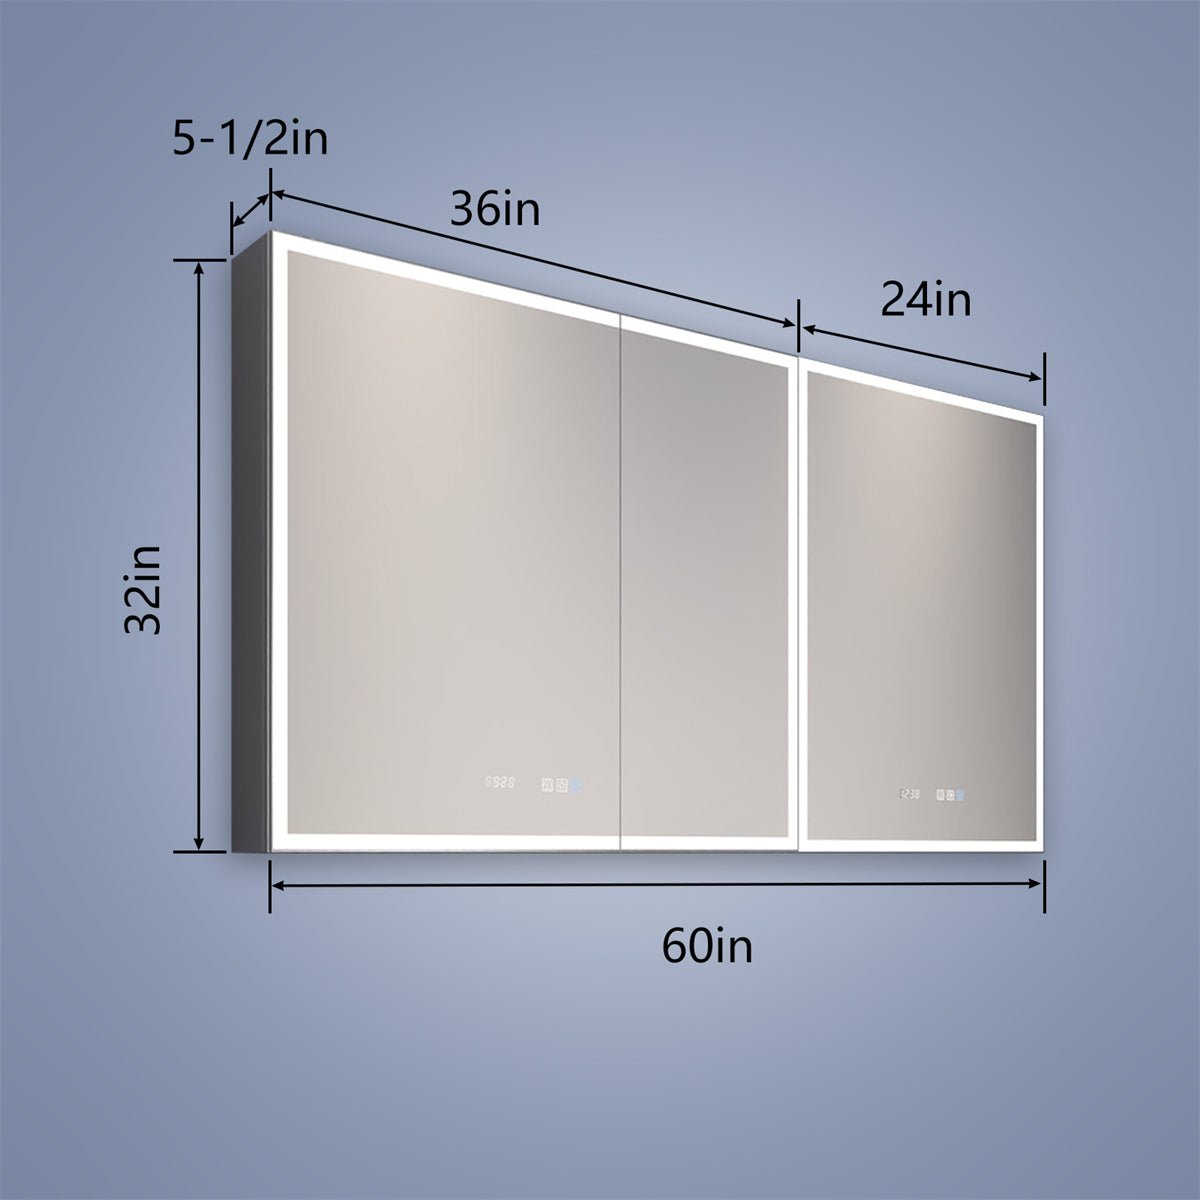 Rim 60" W x 32" H Lighted Medicine Cabinet Recessed or Surface led Medicine Cabinet with Outlets & USBs